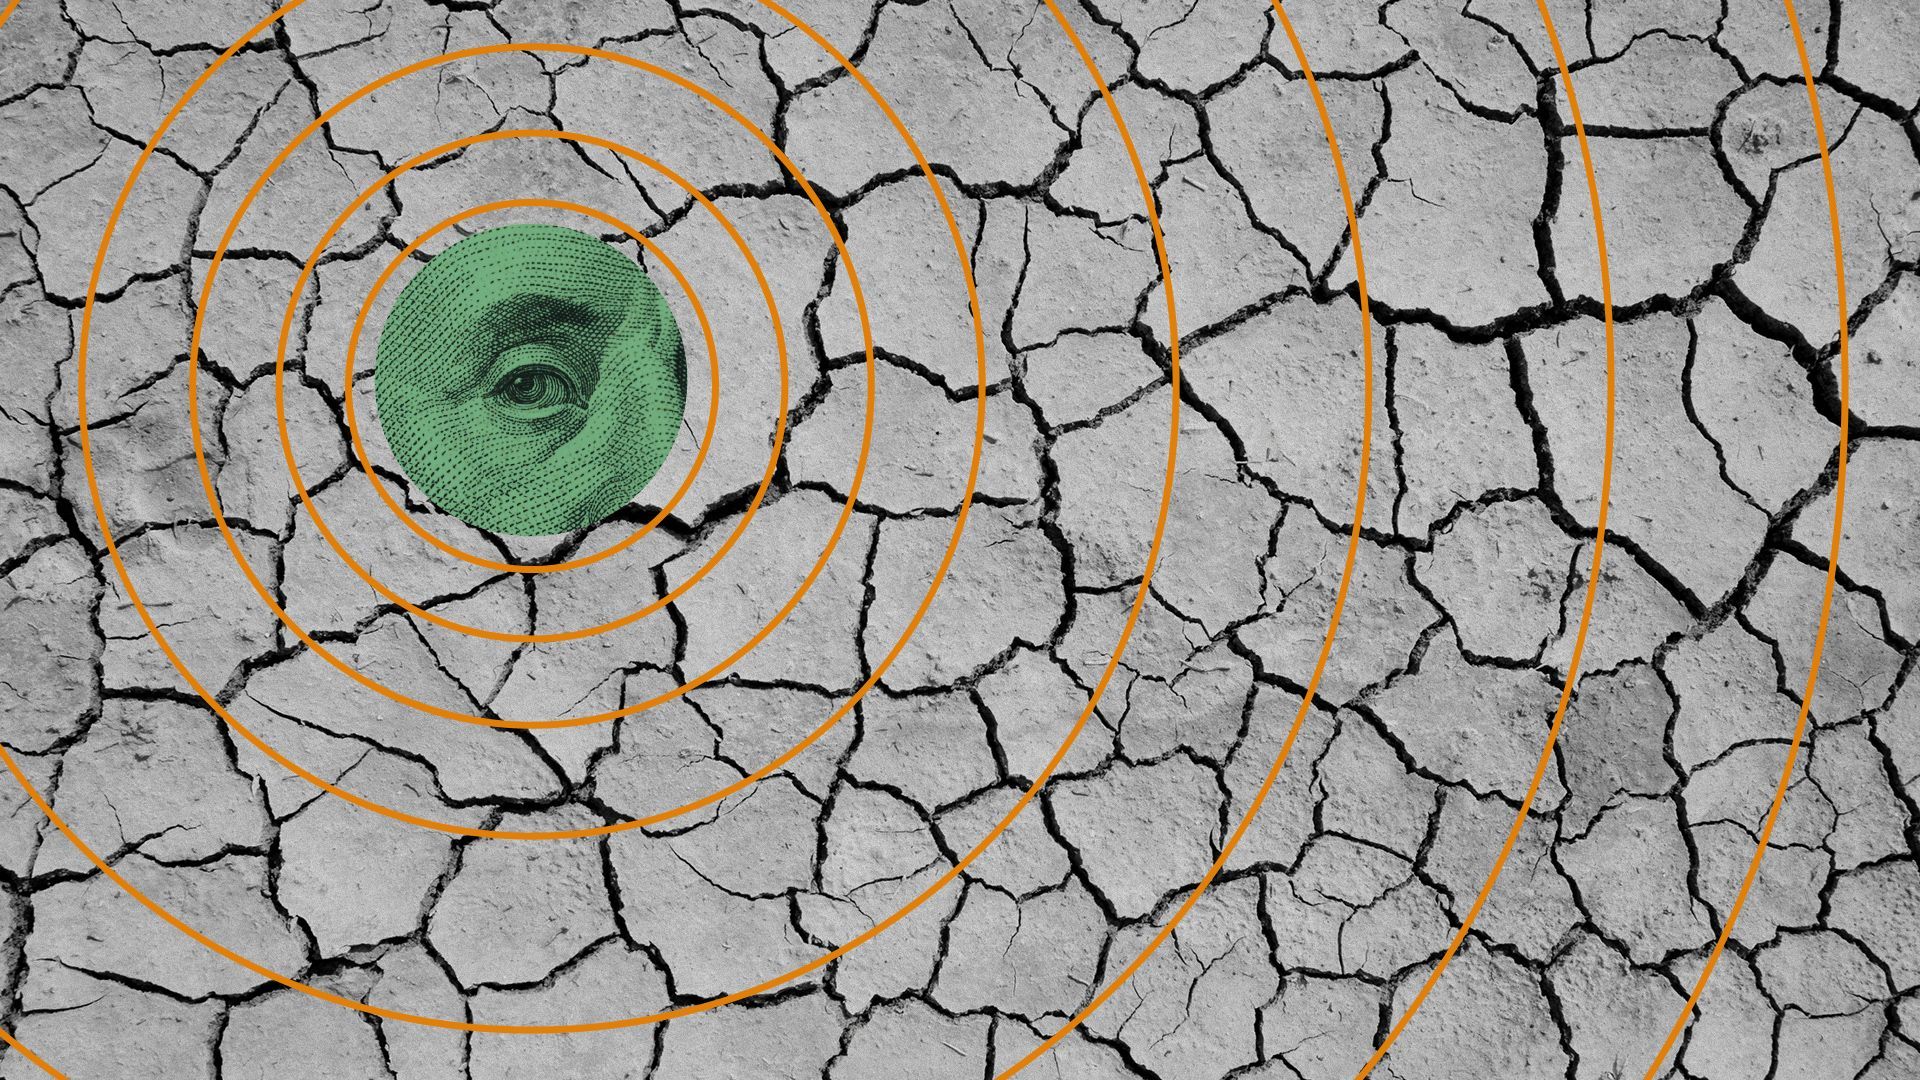 Illustration of the eye of Benjamin Franklin from a hundred dollar bill isolated in a dried out landscape with abstract circles surrounding the eye. 